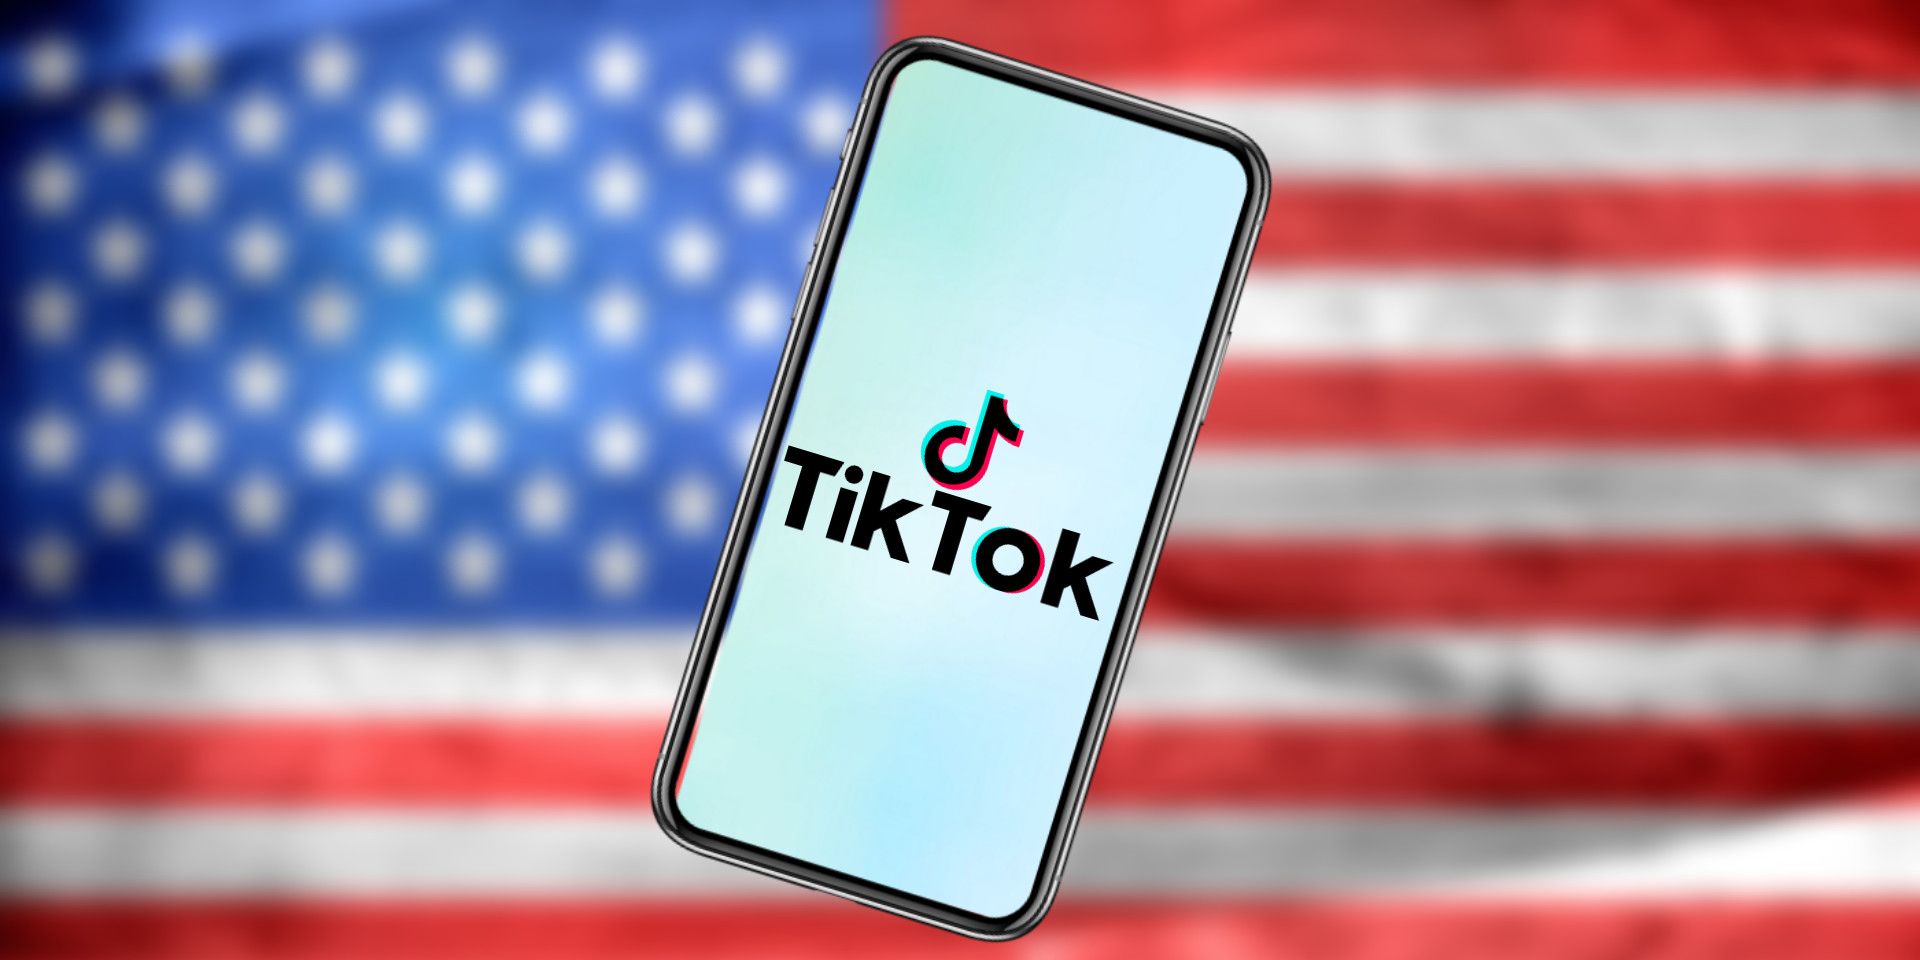 TikTok logo on a smartphone in the foreground with a blurred American flag in the background